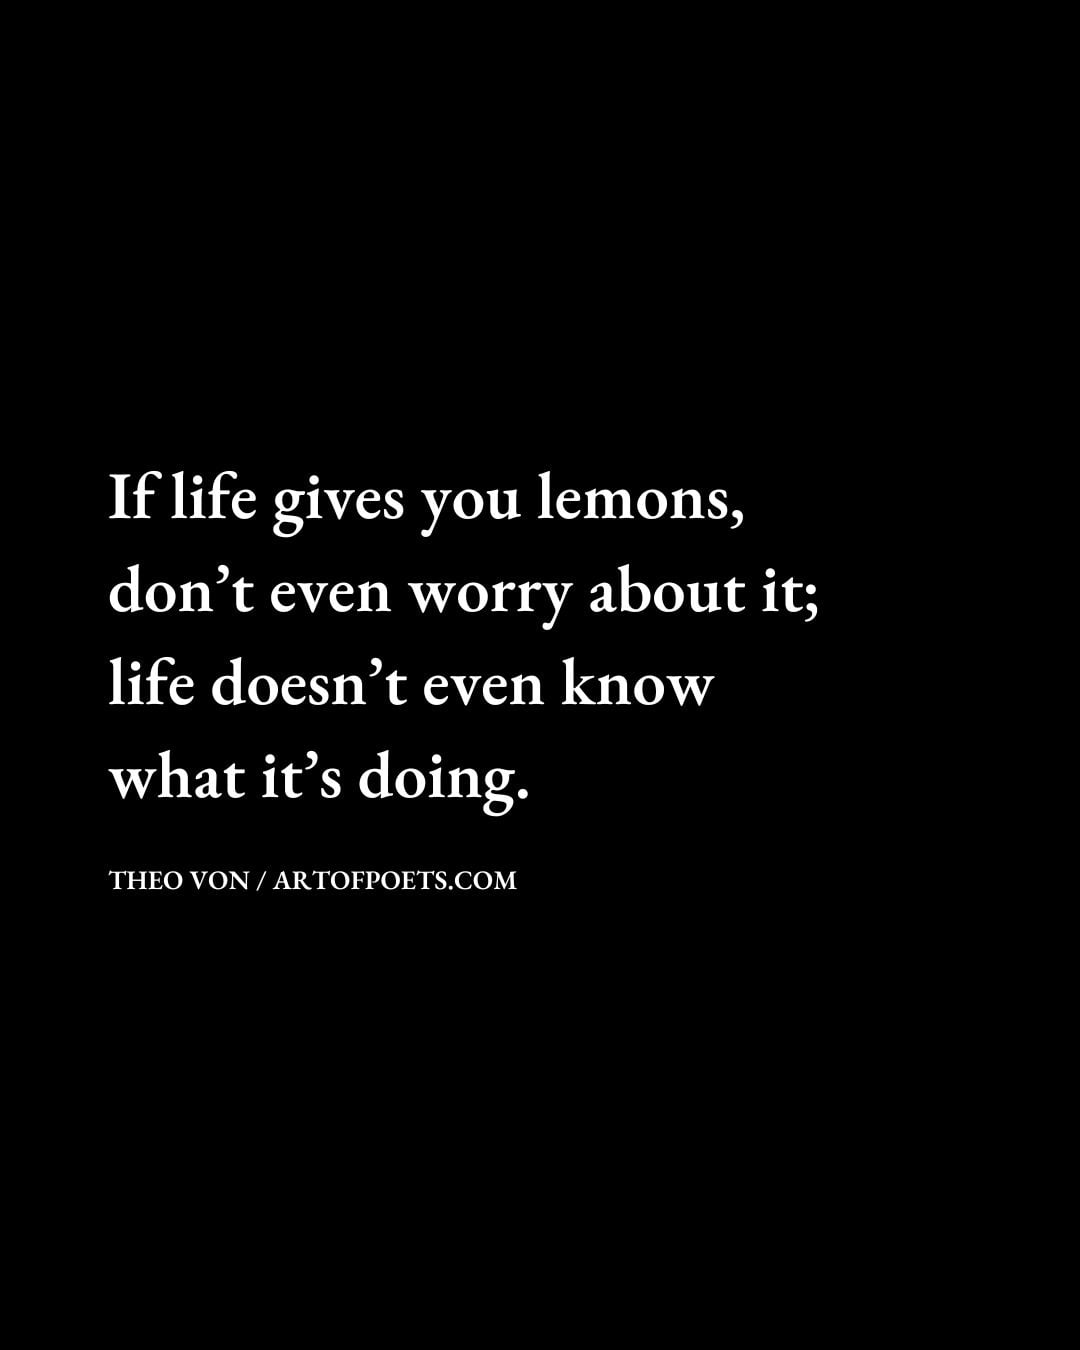 If life gives you lemons dont even worry about it life doesnt even know what its doing